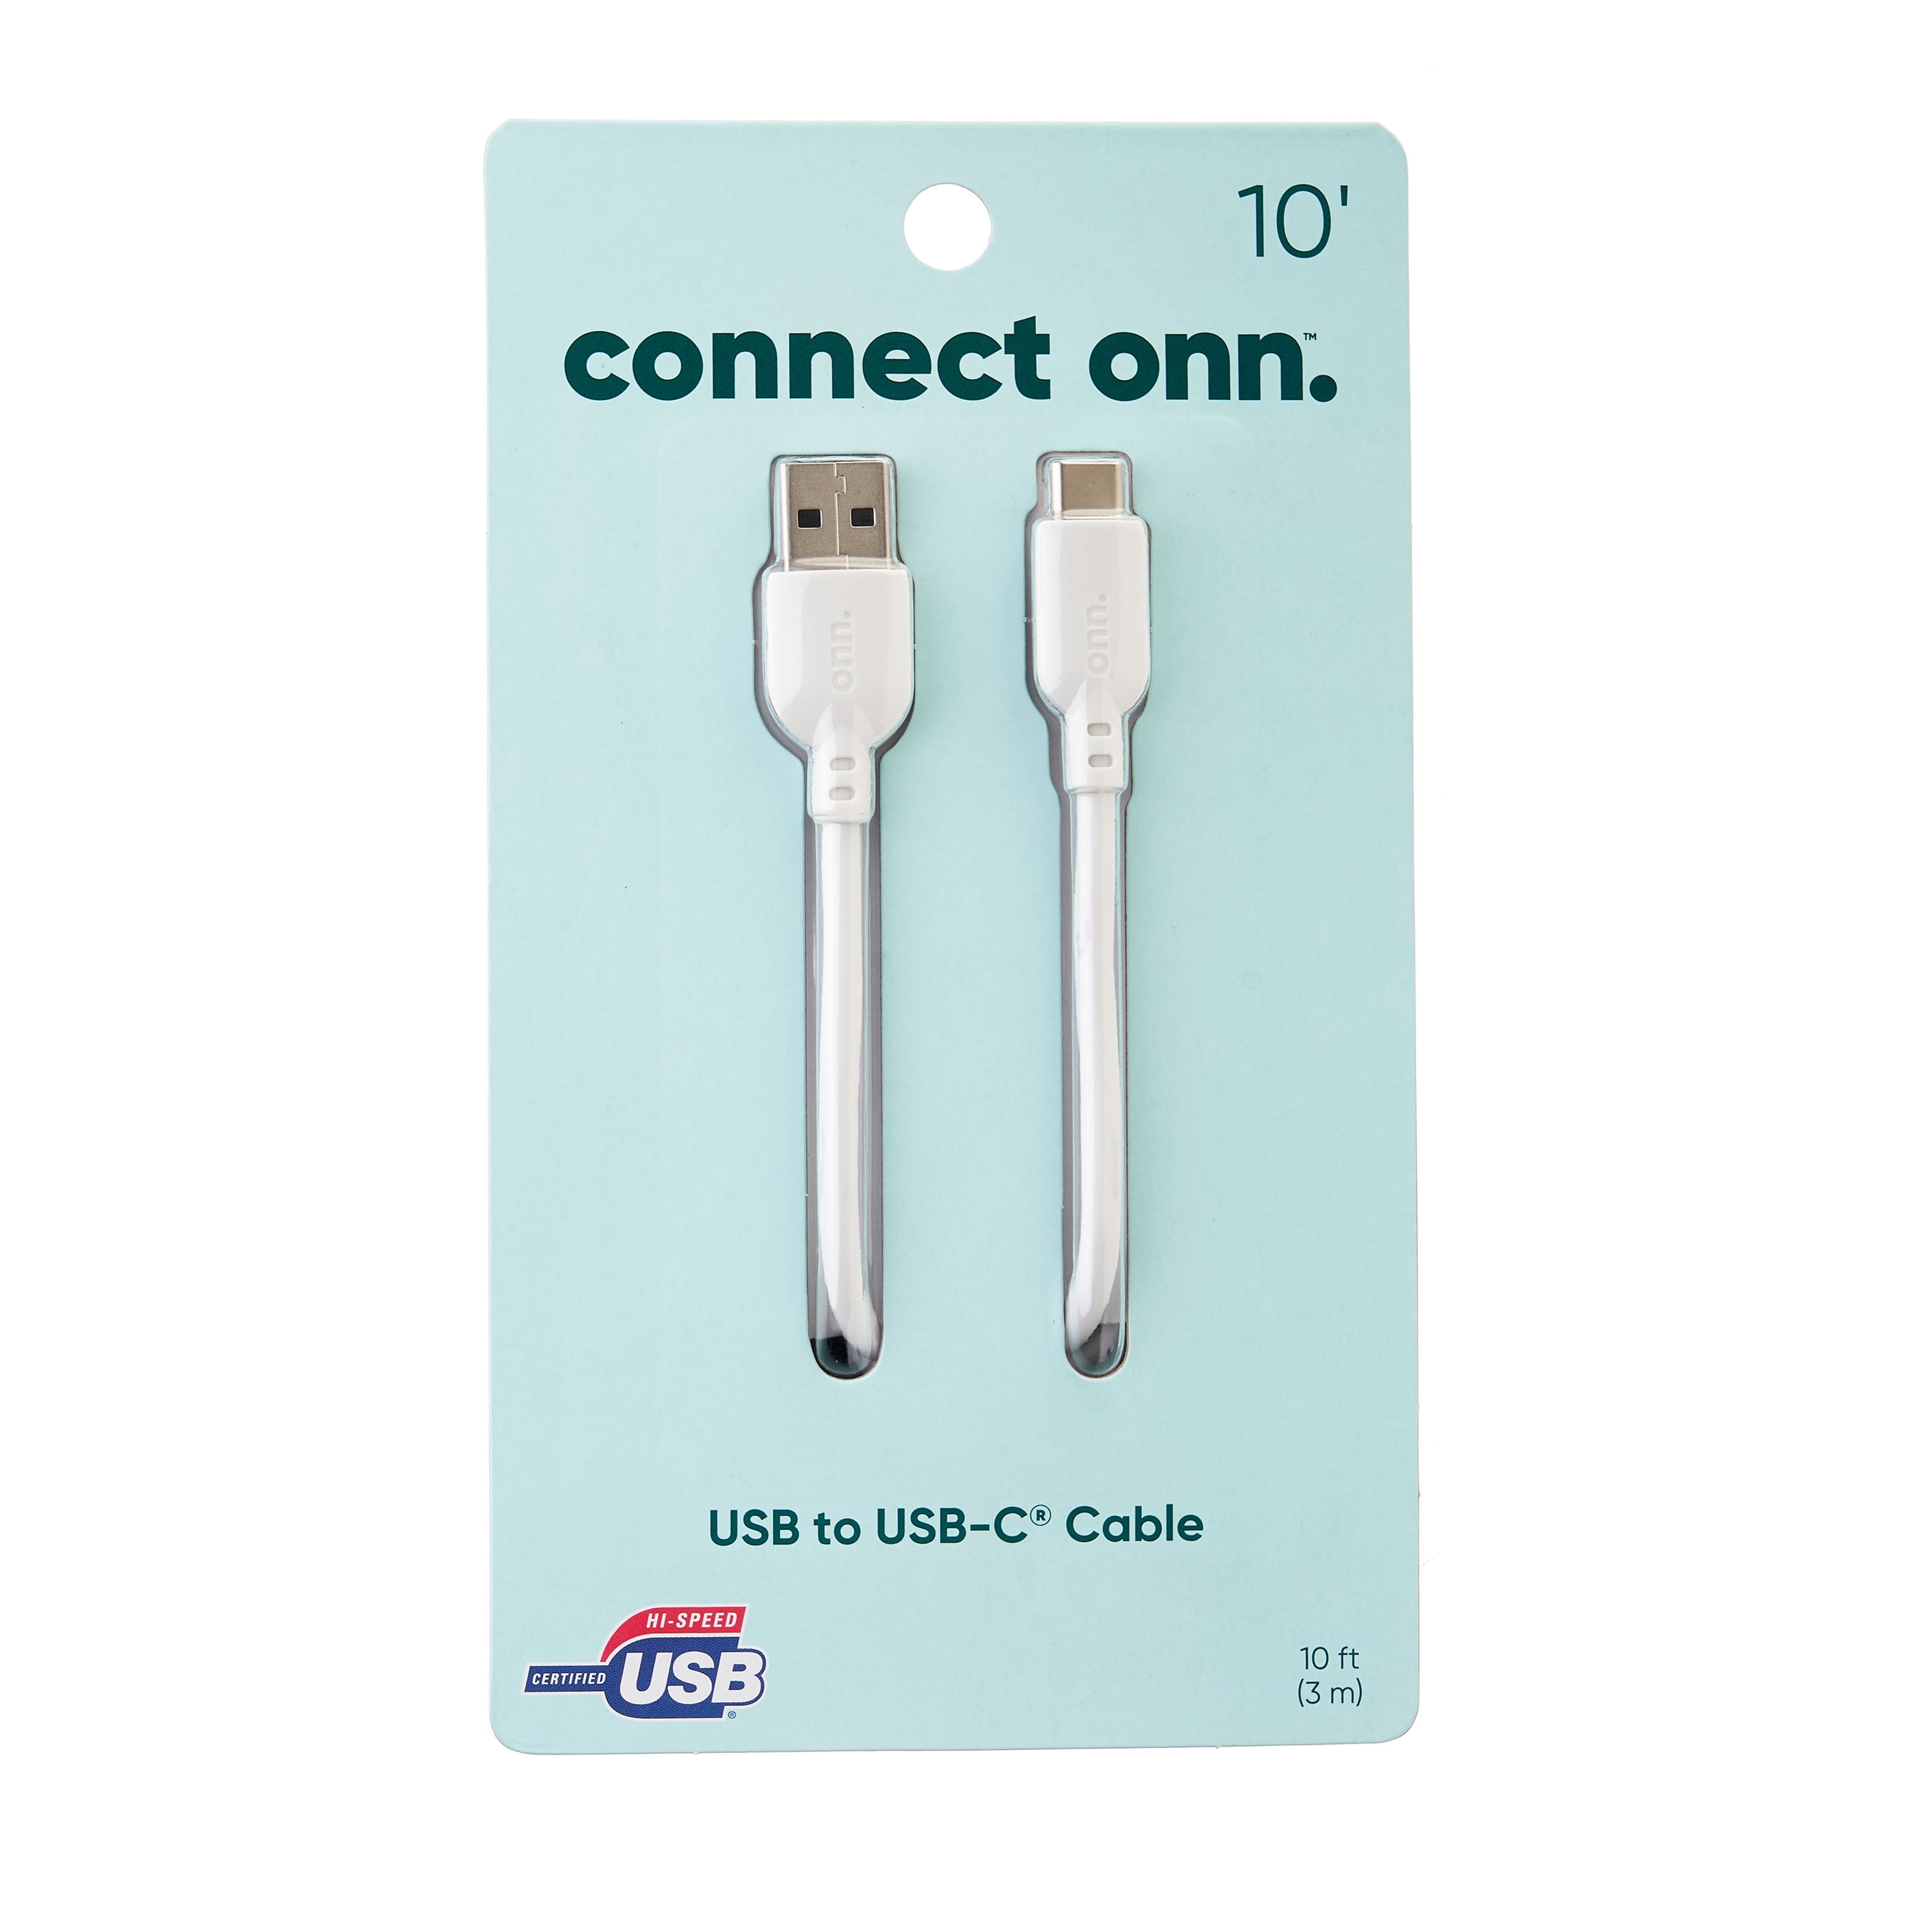 onn. USB to USB-C Cable, White, 10'